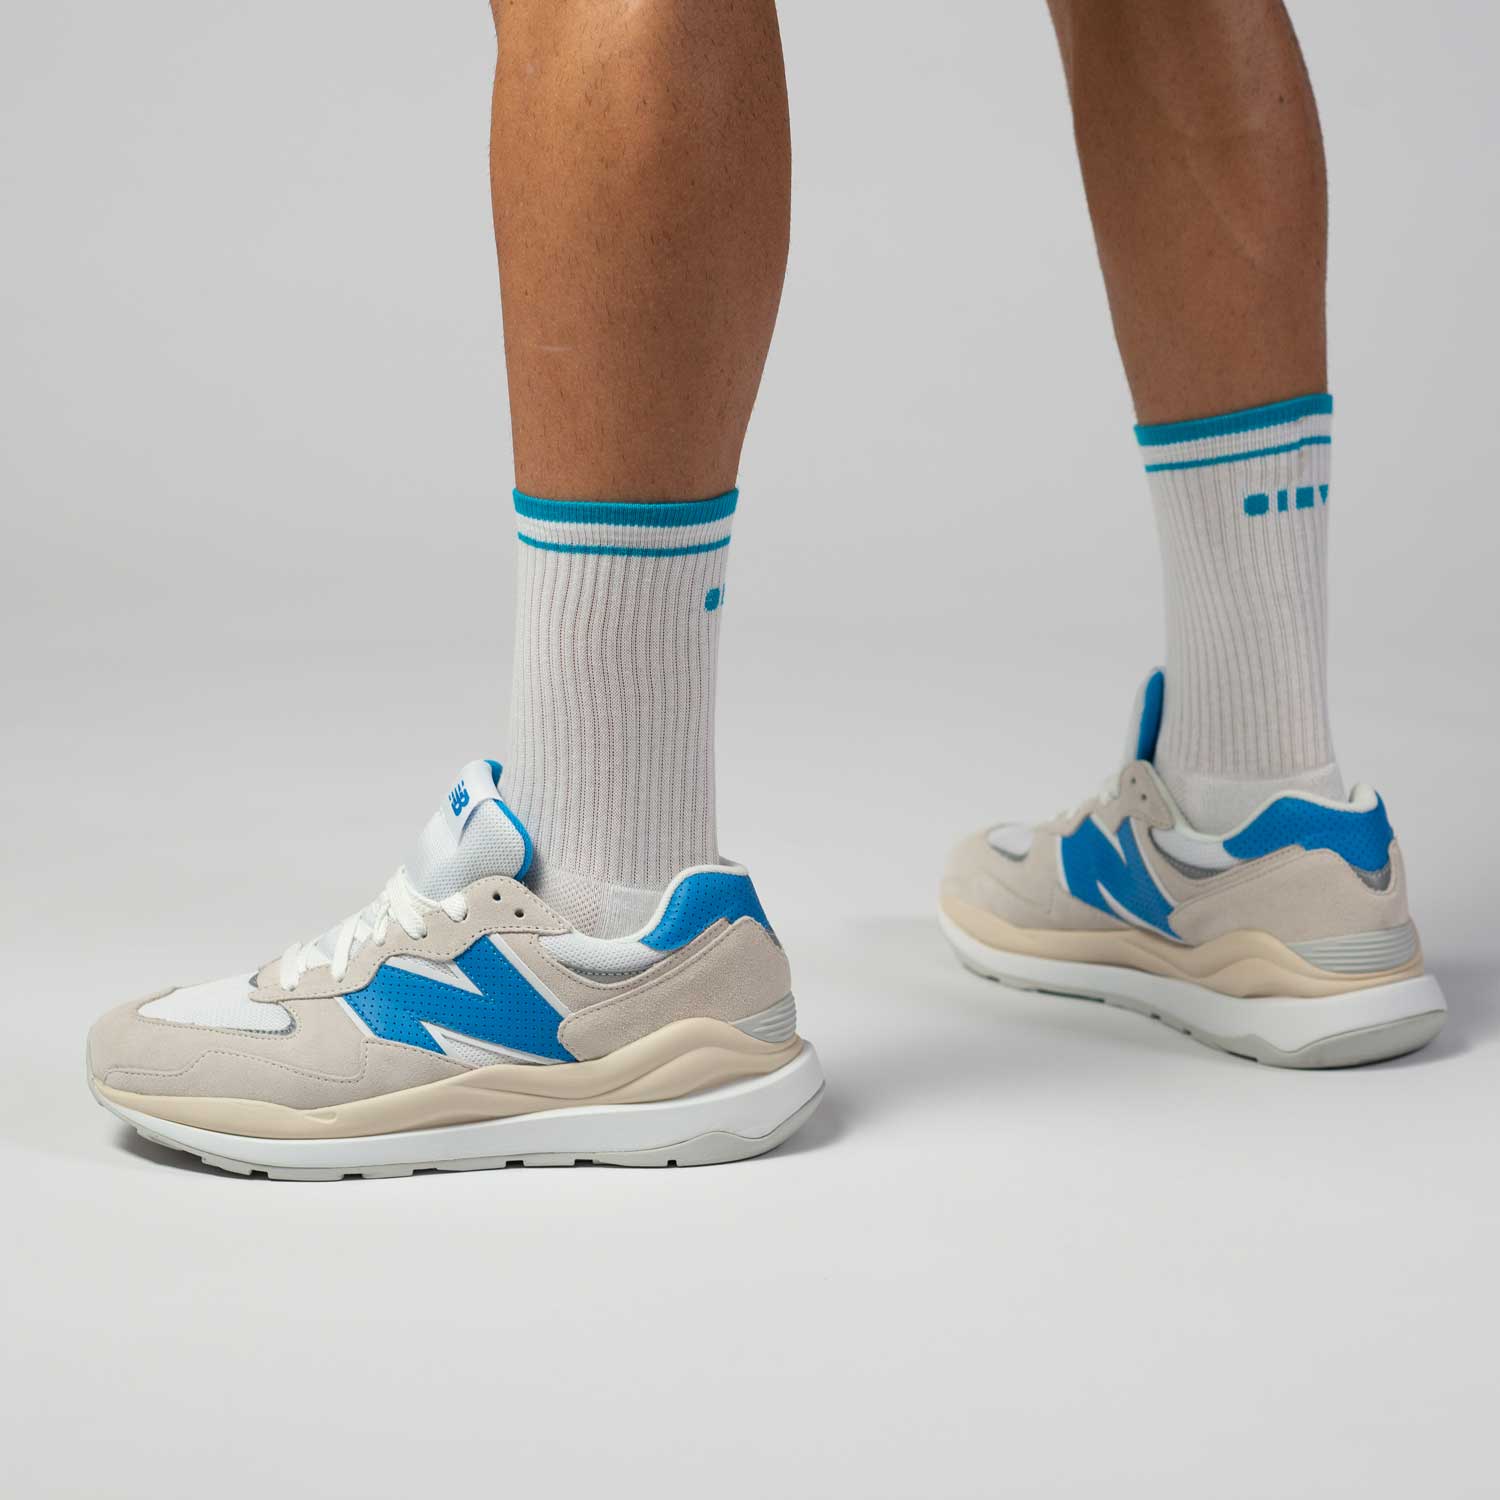 Clay Active's white and blue men's tennis socks in studio with New Balance shoes.